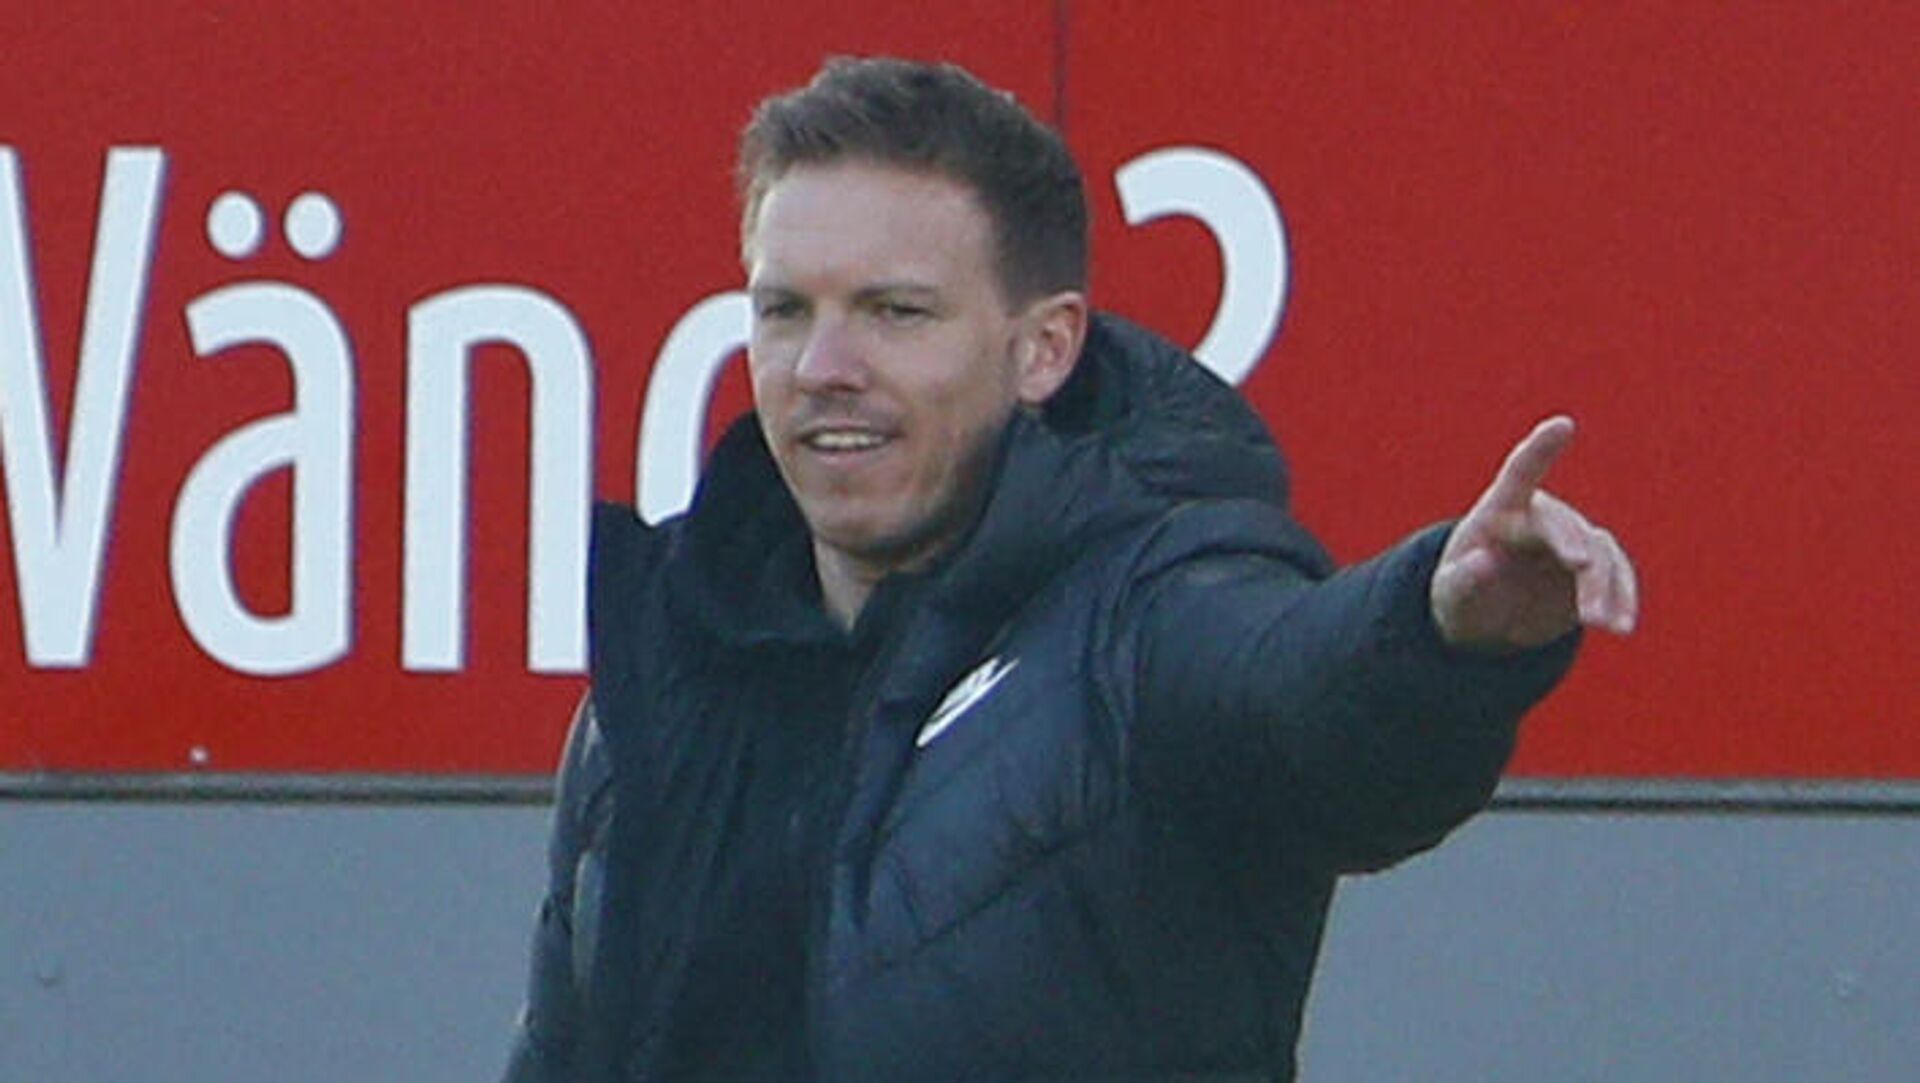 Leipzig's German headcoach Julian Nagelsmann gestures during the German first division Bundesliga football match between SC Freiburg and RB Leipzig in Freiburg, southwestern Germany, on March 6, 2021. (Photo by Ralph ORLOWSKI / POOL / AFP) / DFL REGULATIONS PROHIBIT ANY USE OF PHOTOGRAPHS AS IMAGE SEQUENCES AND/OR QUASI-VIDEO - РИА Новости, 1920, 09.03.2021